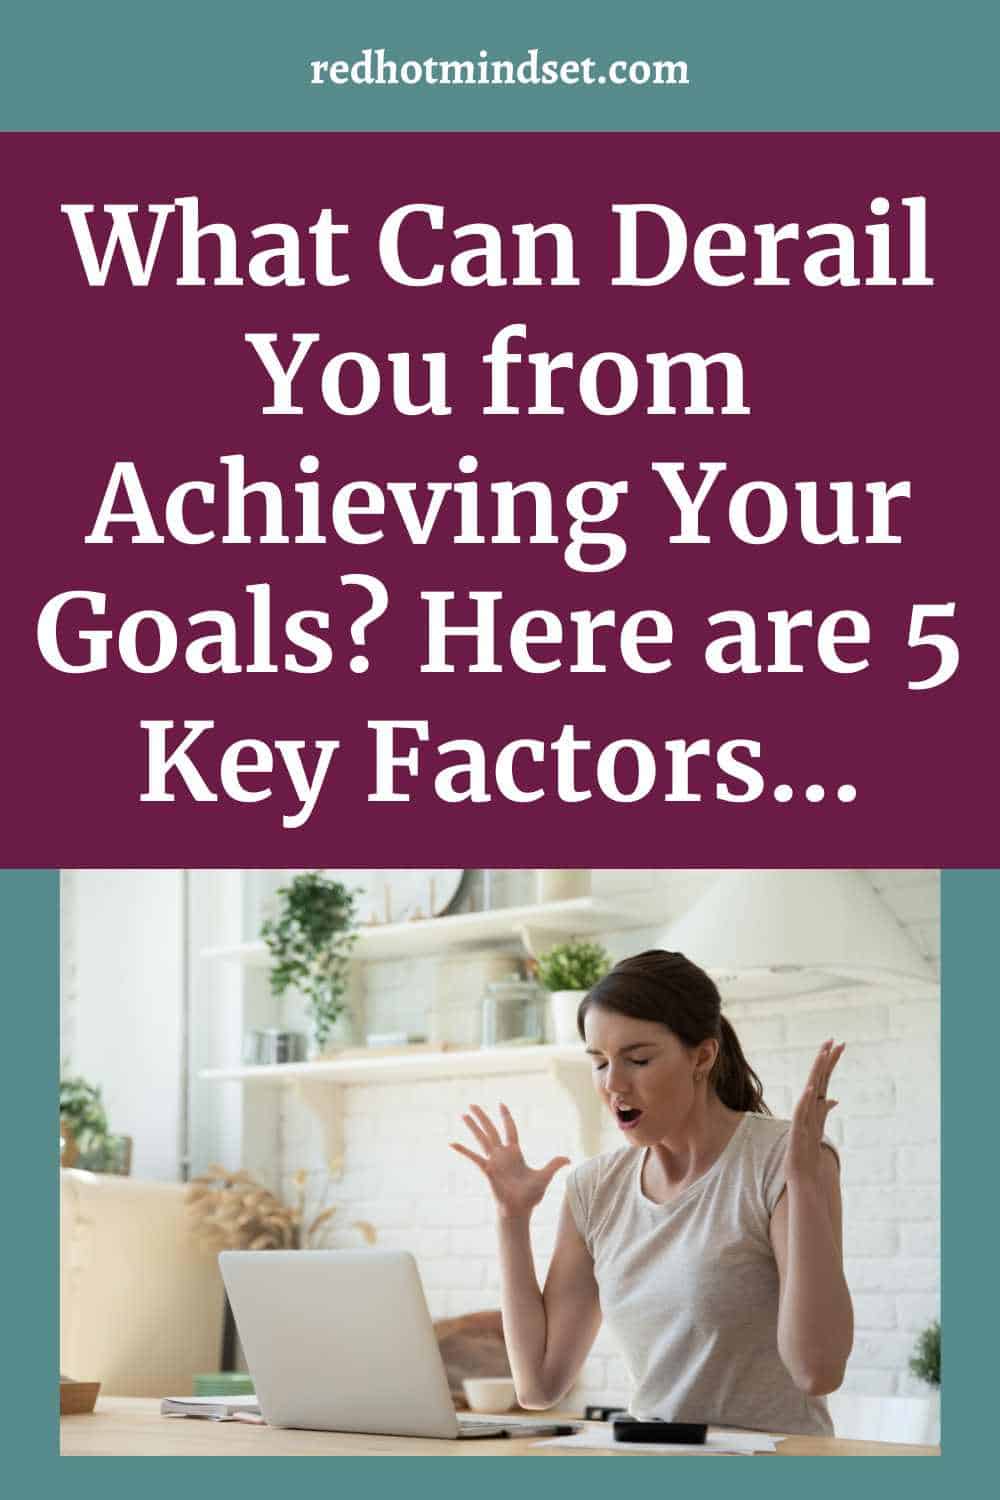 Ep 177 | What Can Derail You from Achieving Your Goals? Here are 5 Key Factors… with Gillian Perkins